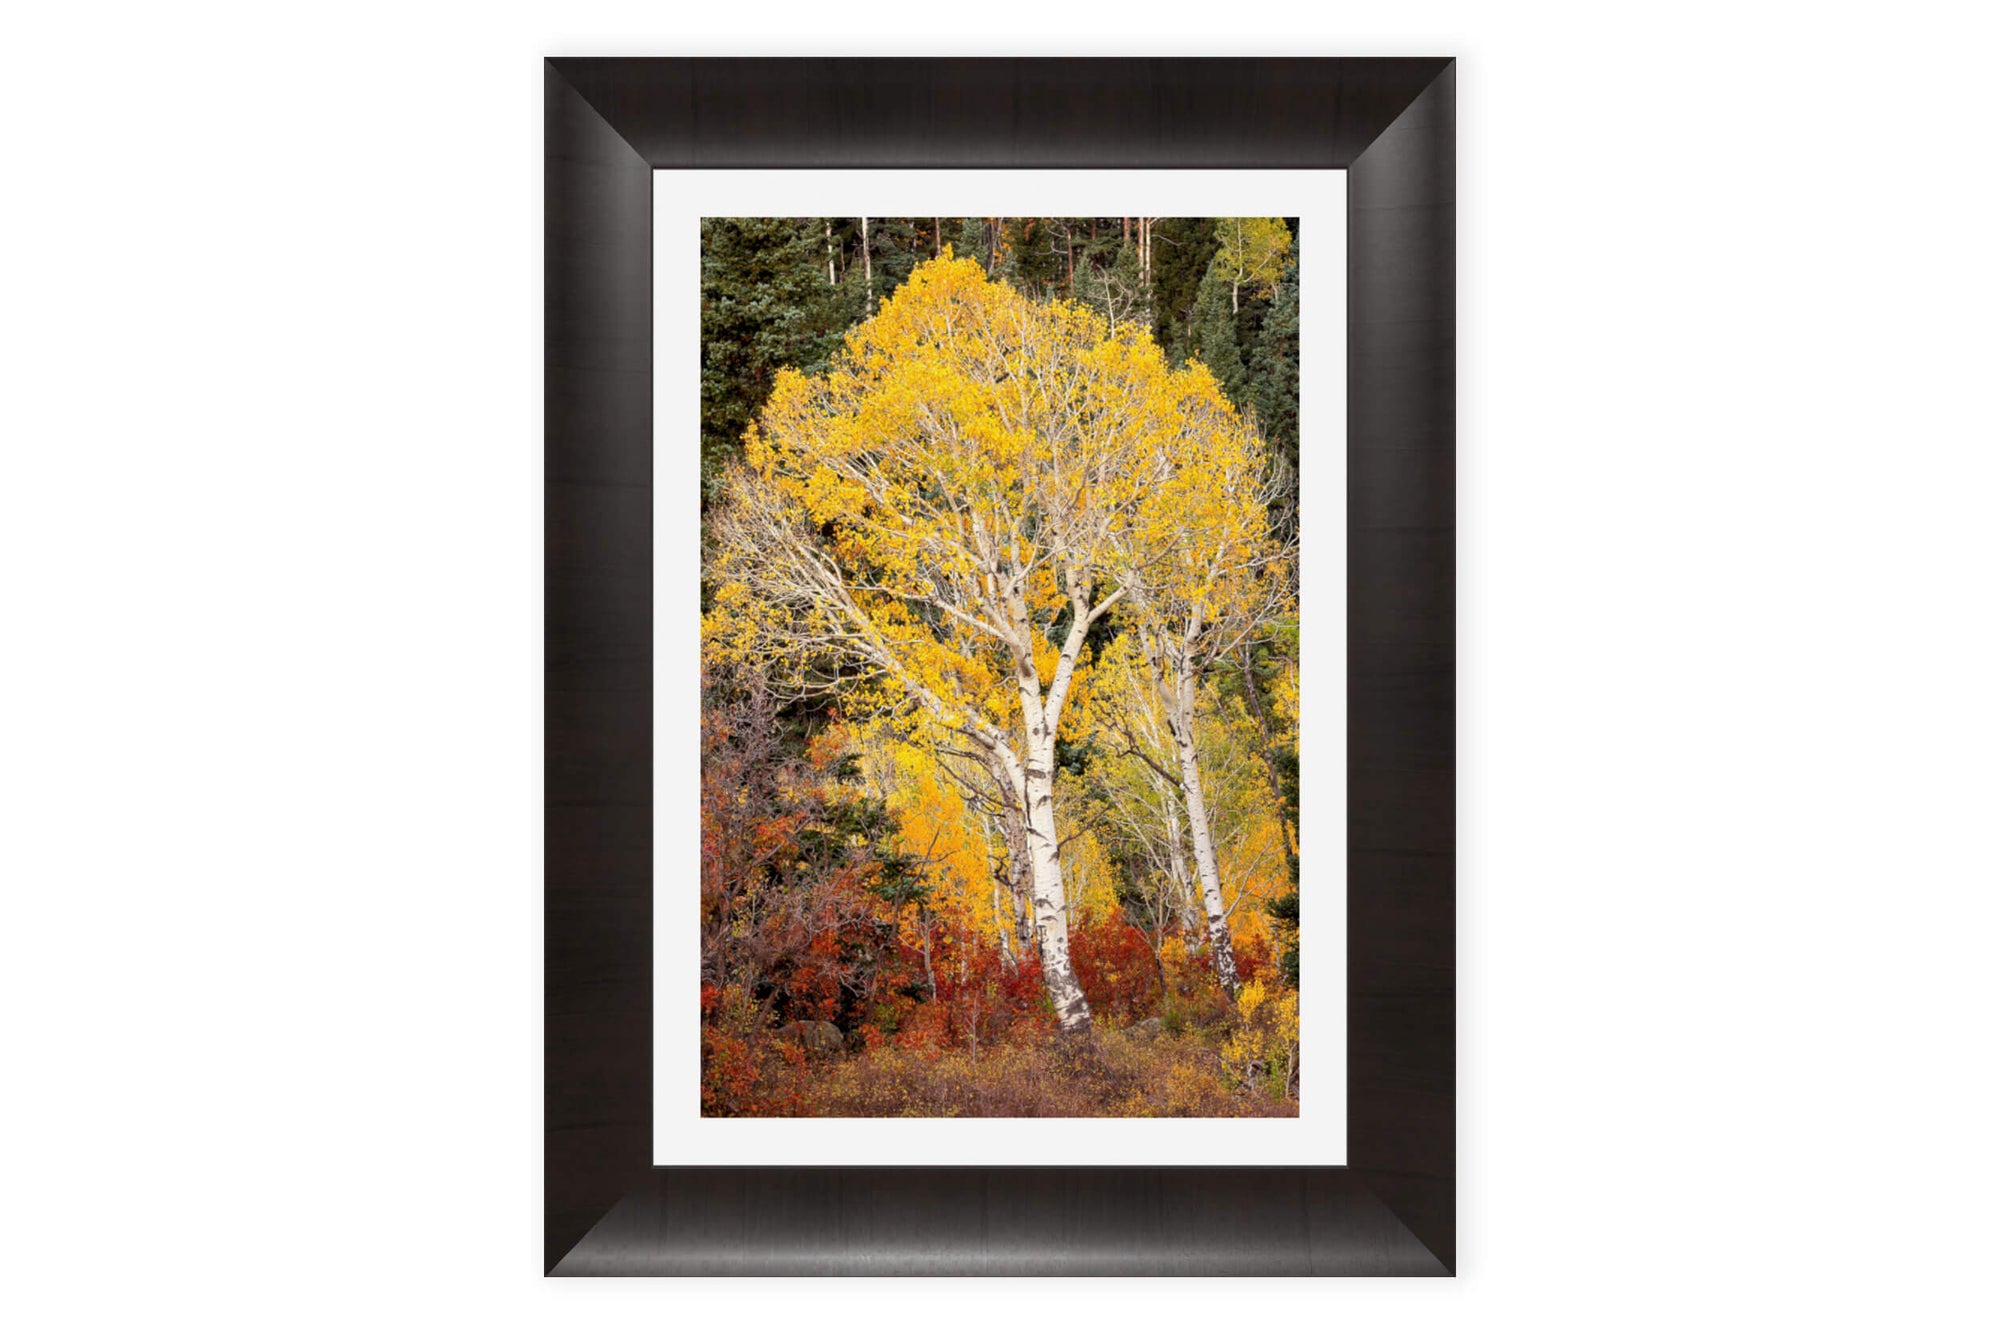 A framed Telluride fall colors picture.